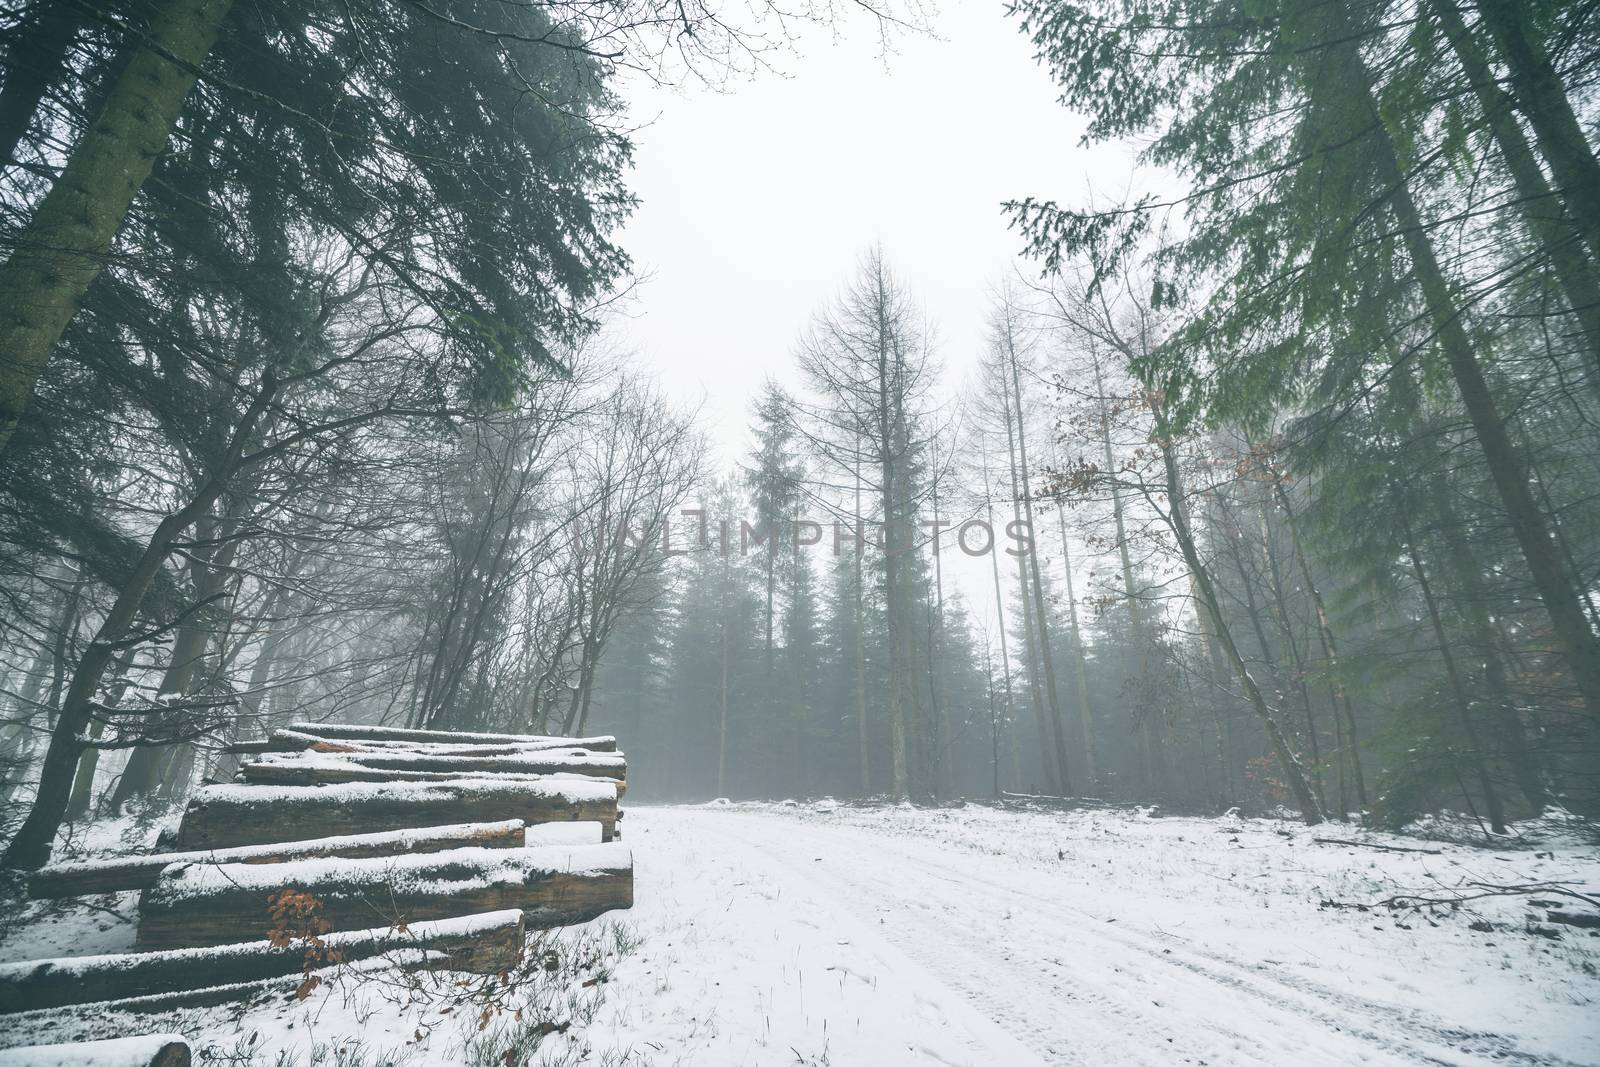 Woodpile in a misty forest with snow on the ground in the winter